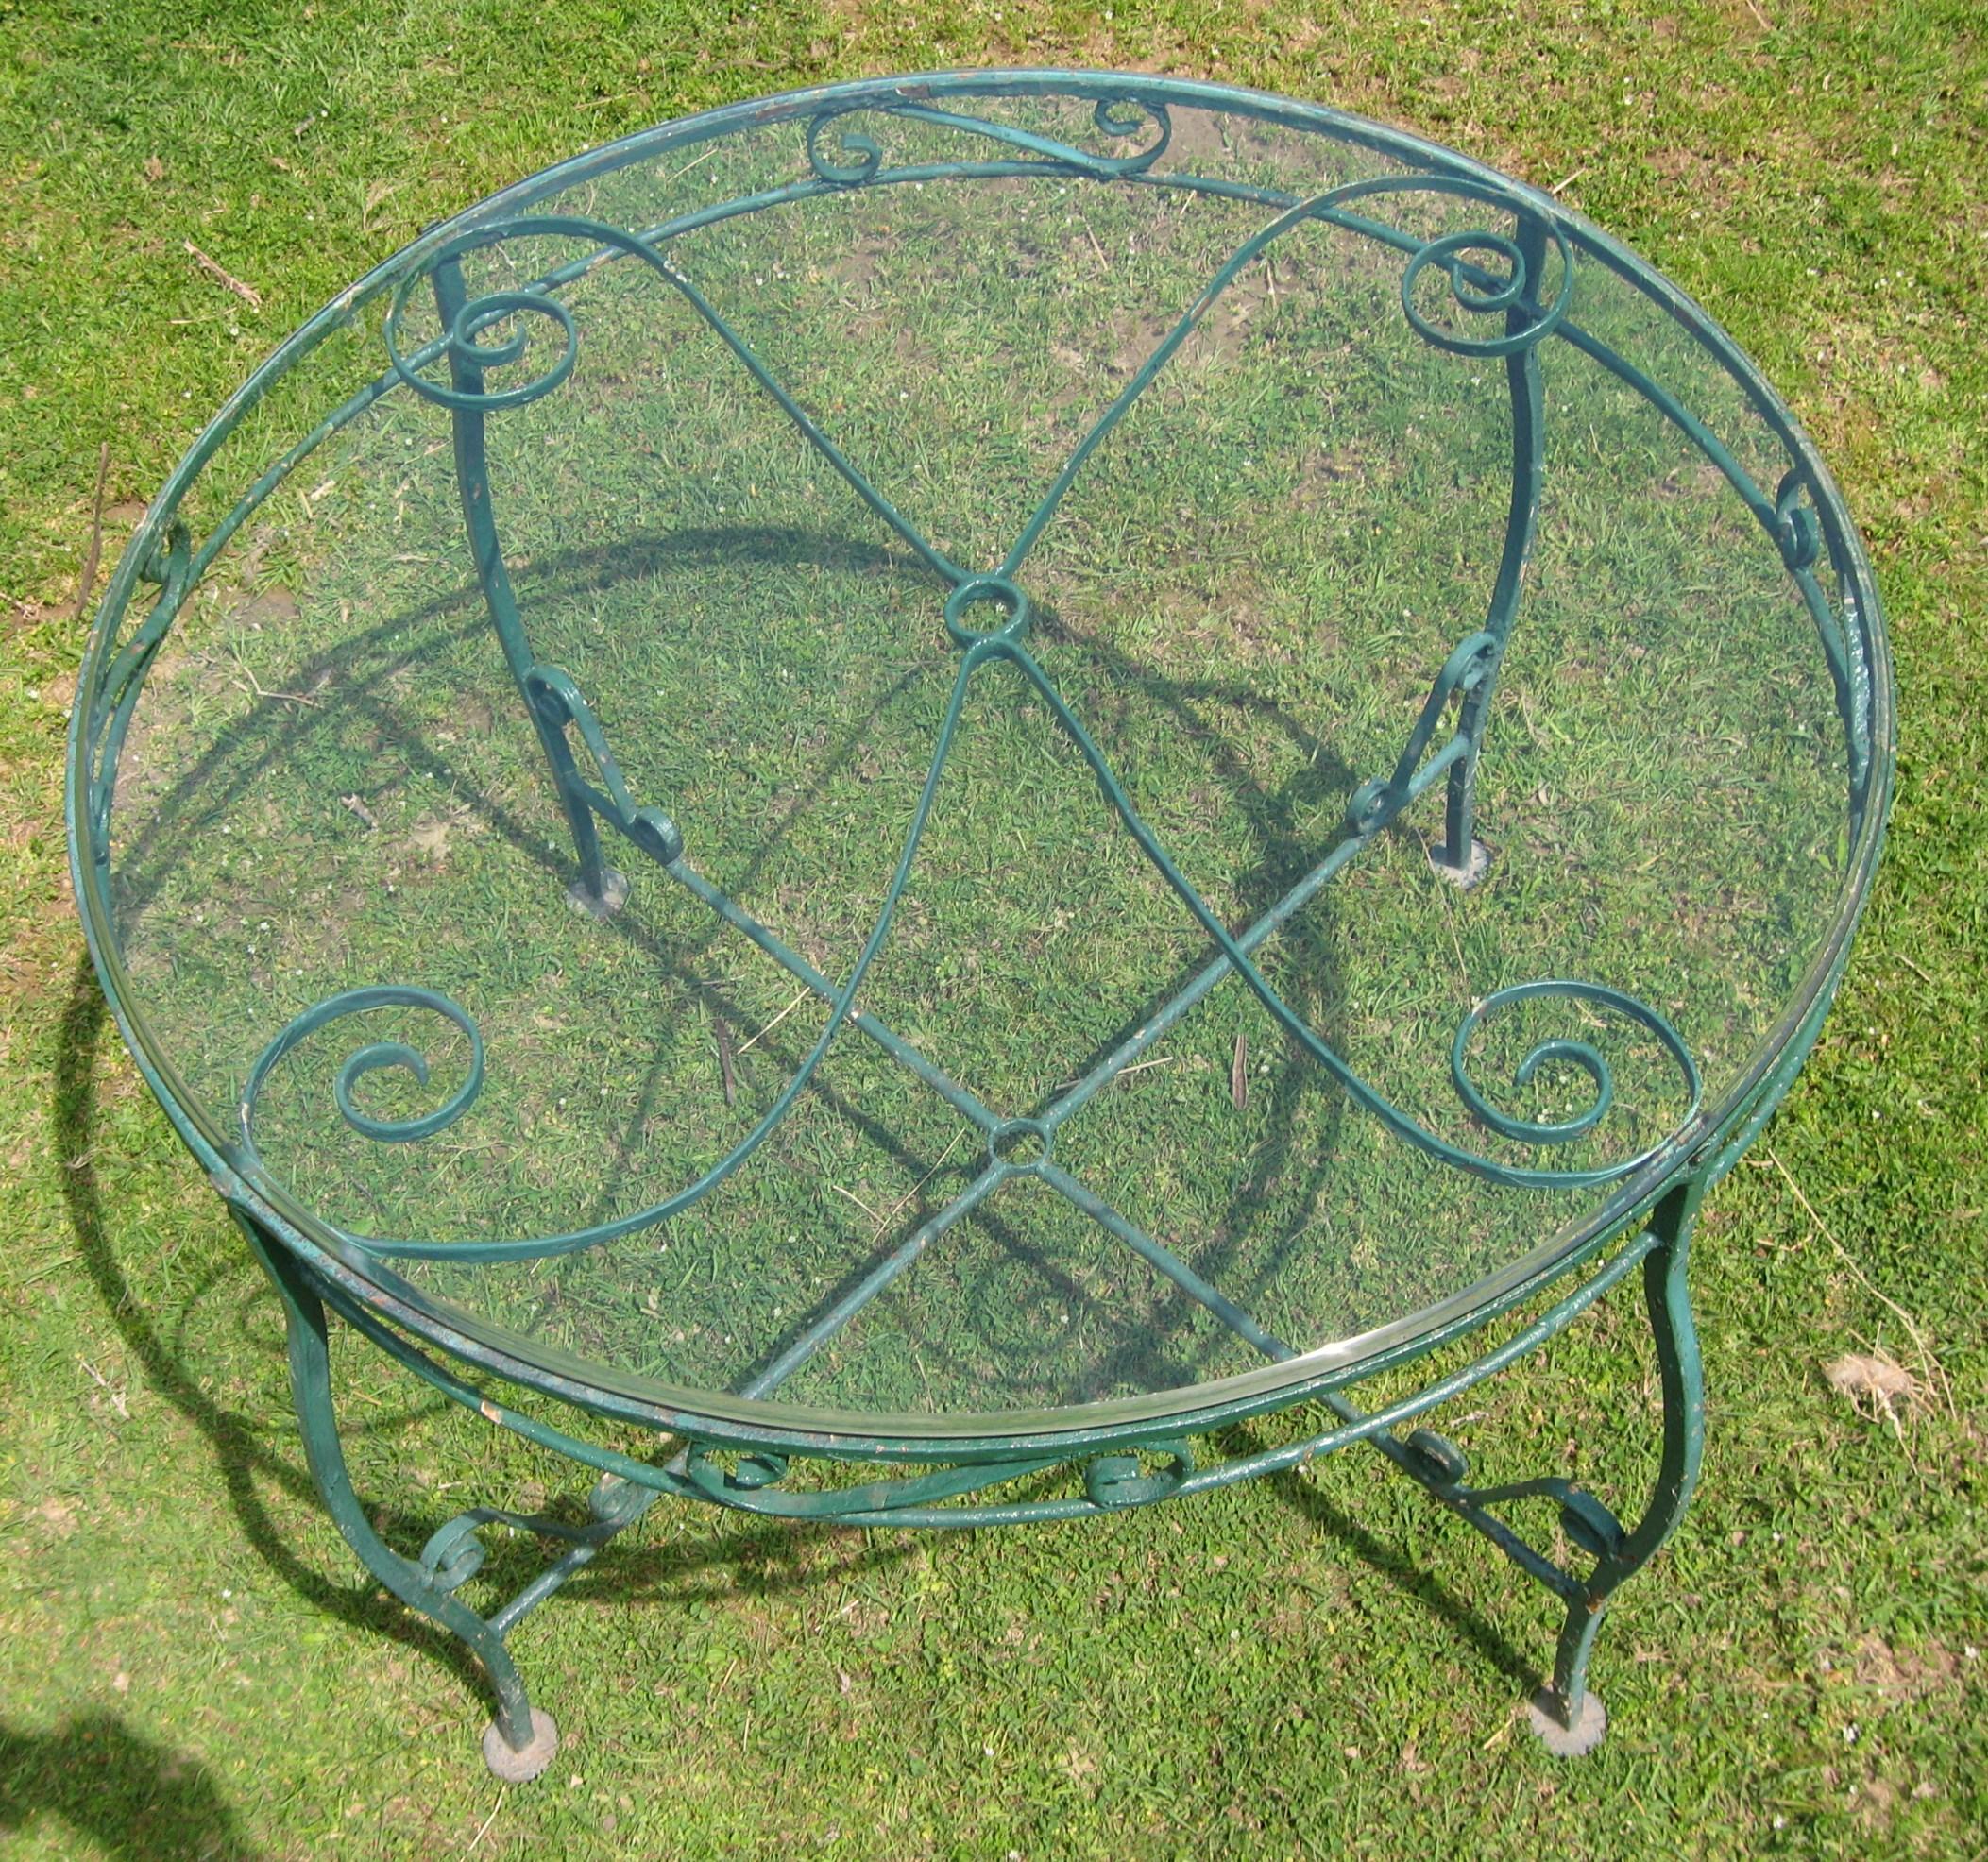 Five-piece wrought iron dining / patio set. One glass-topped table and four chairs. Painted green. Table measures:
42.5 in across.- 29-3/8 in high. - 29- 11/16 in high. With glass top. Chairs measure: 33.5 in high x 17.25 in wide x 22.5 in deep.